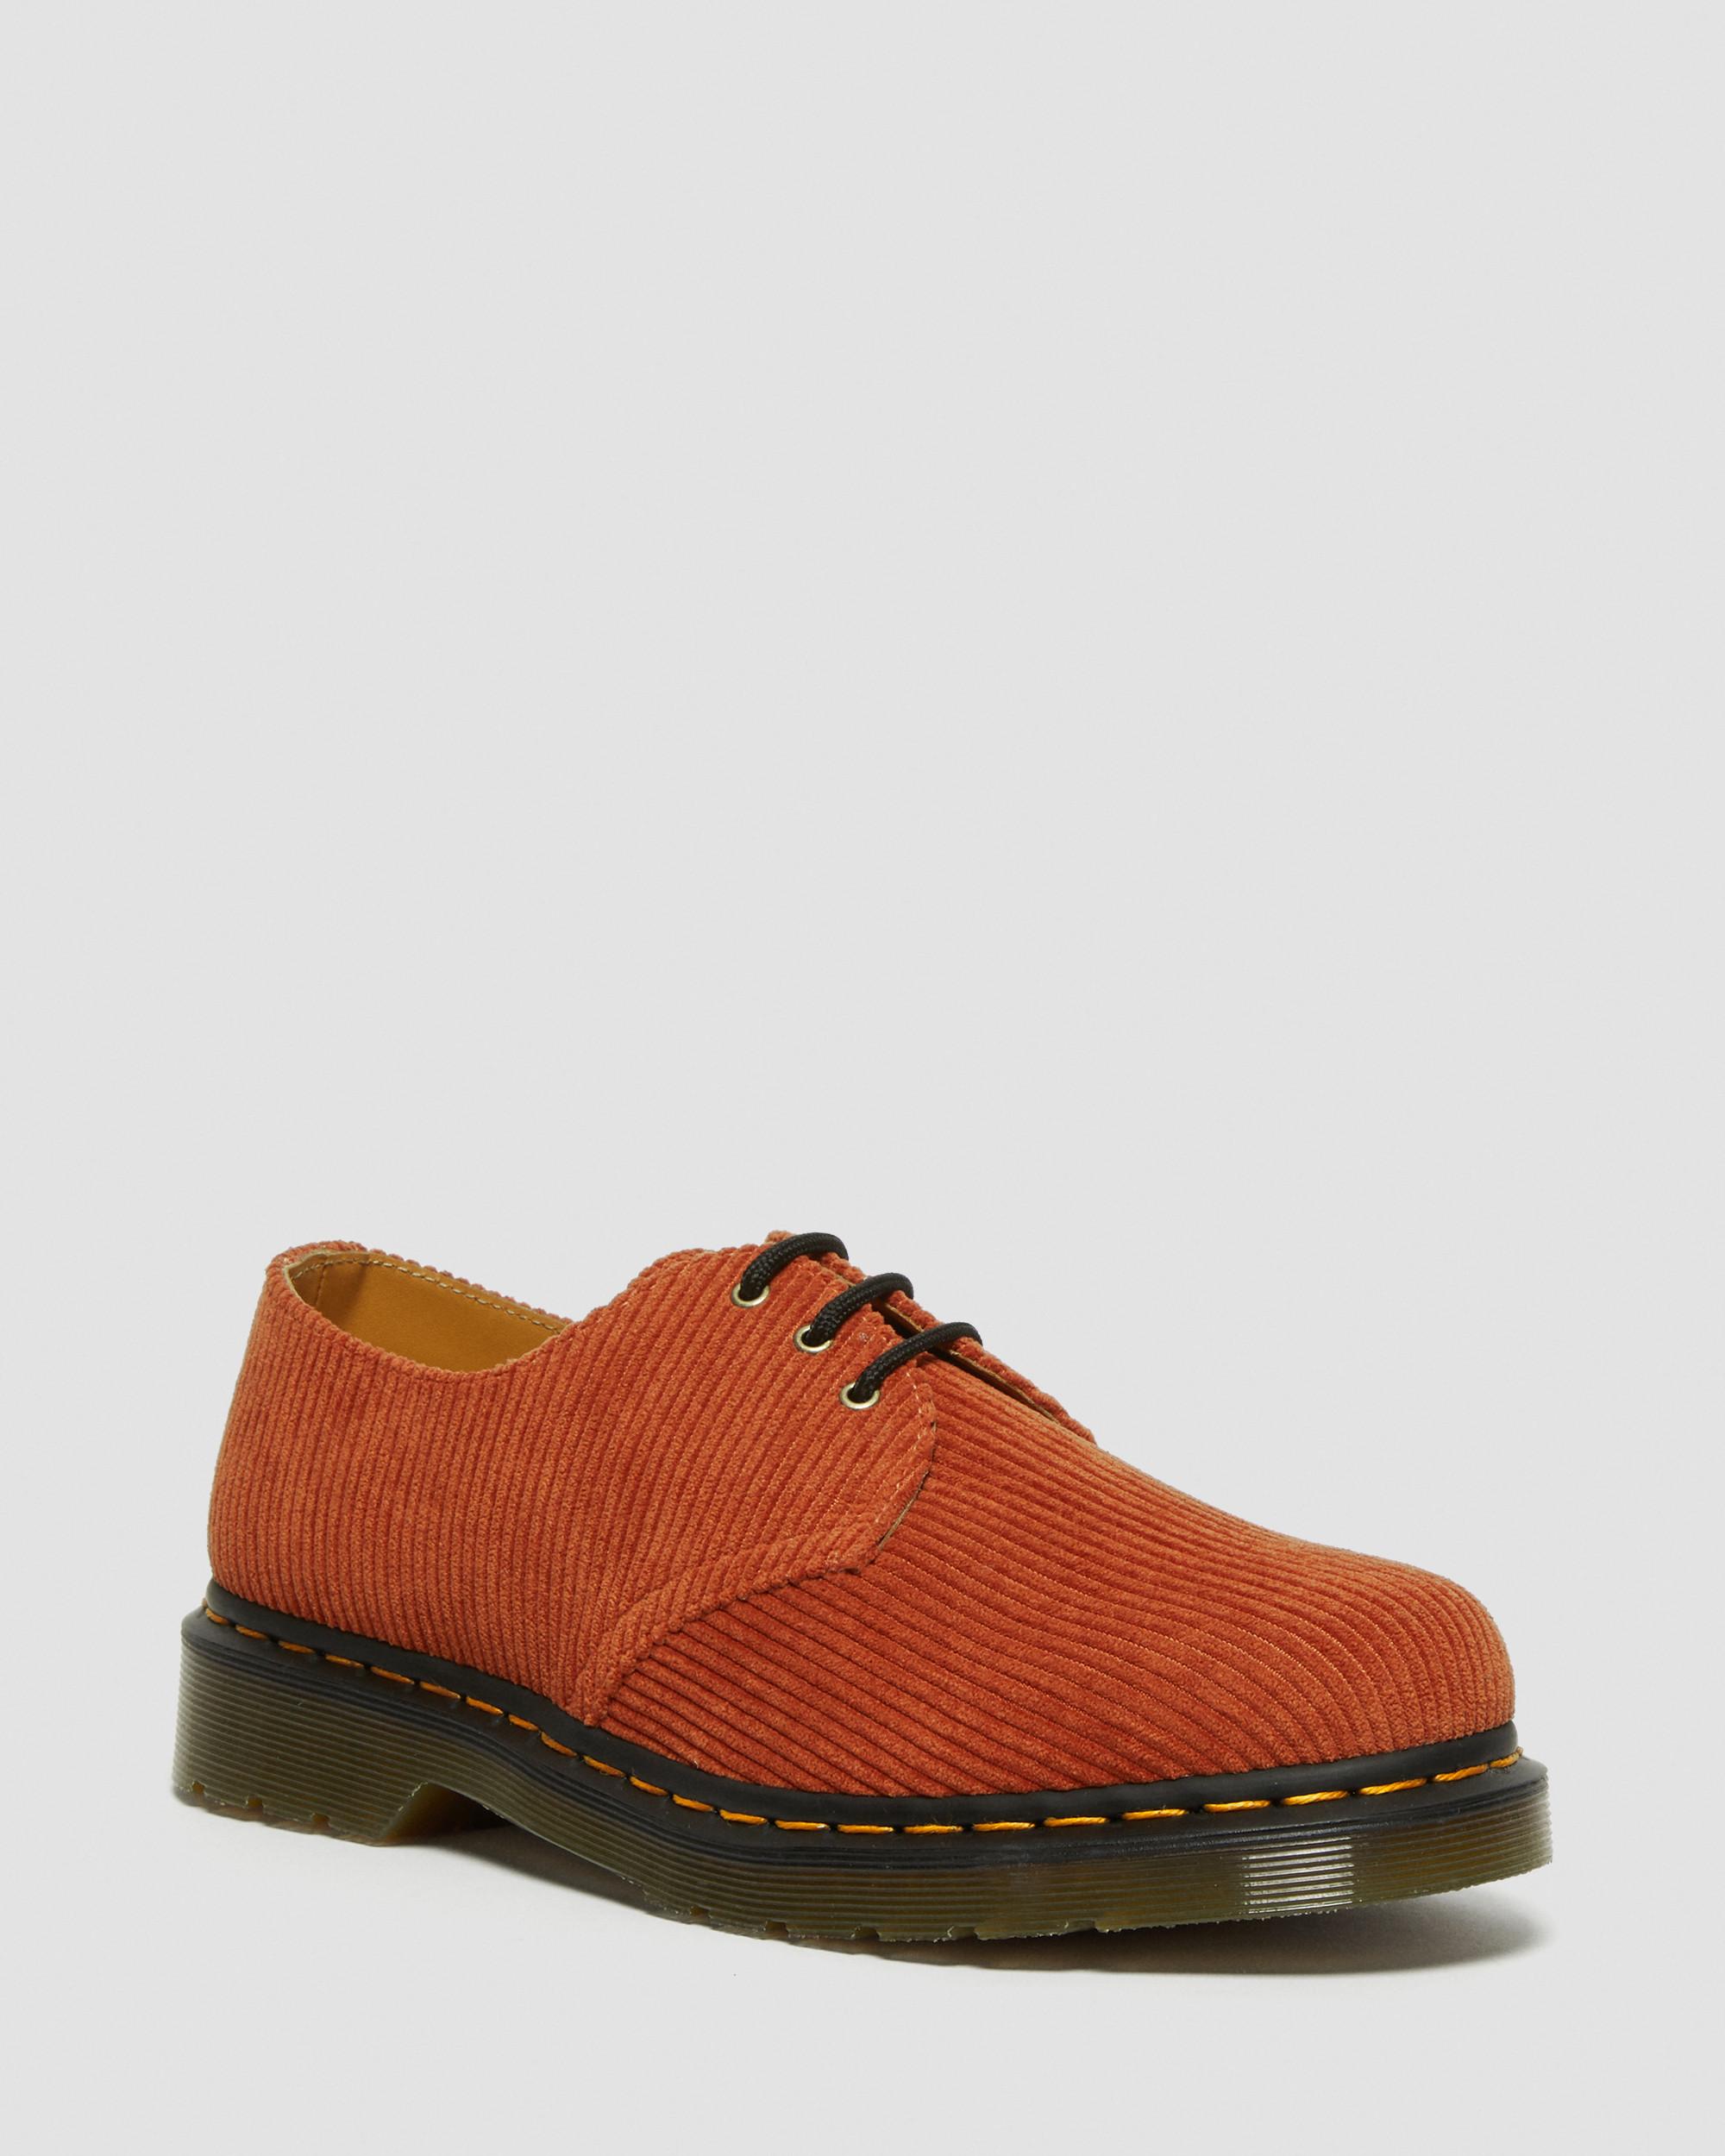 1461 Corduroy Oxford Shoes in Tan